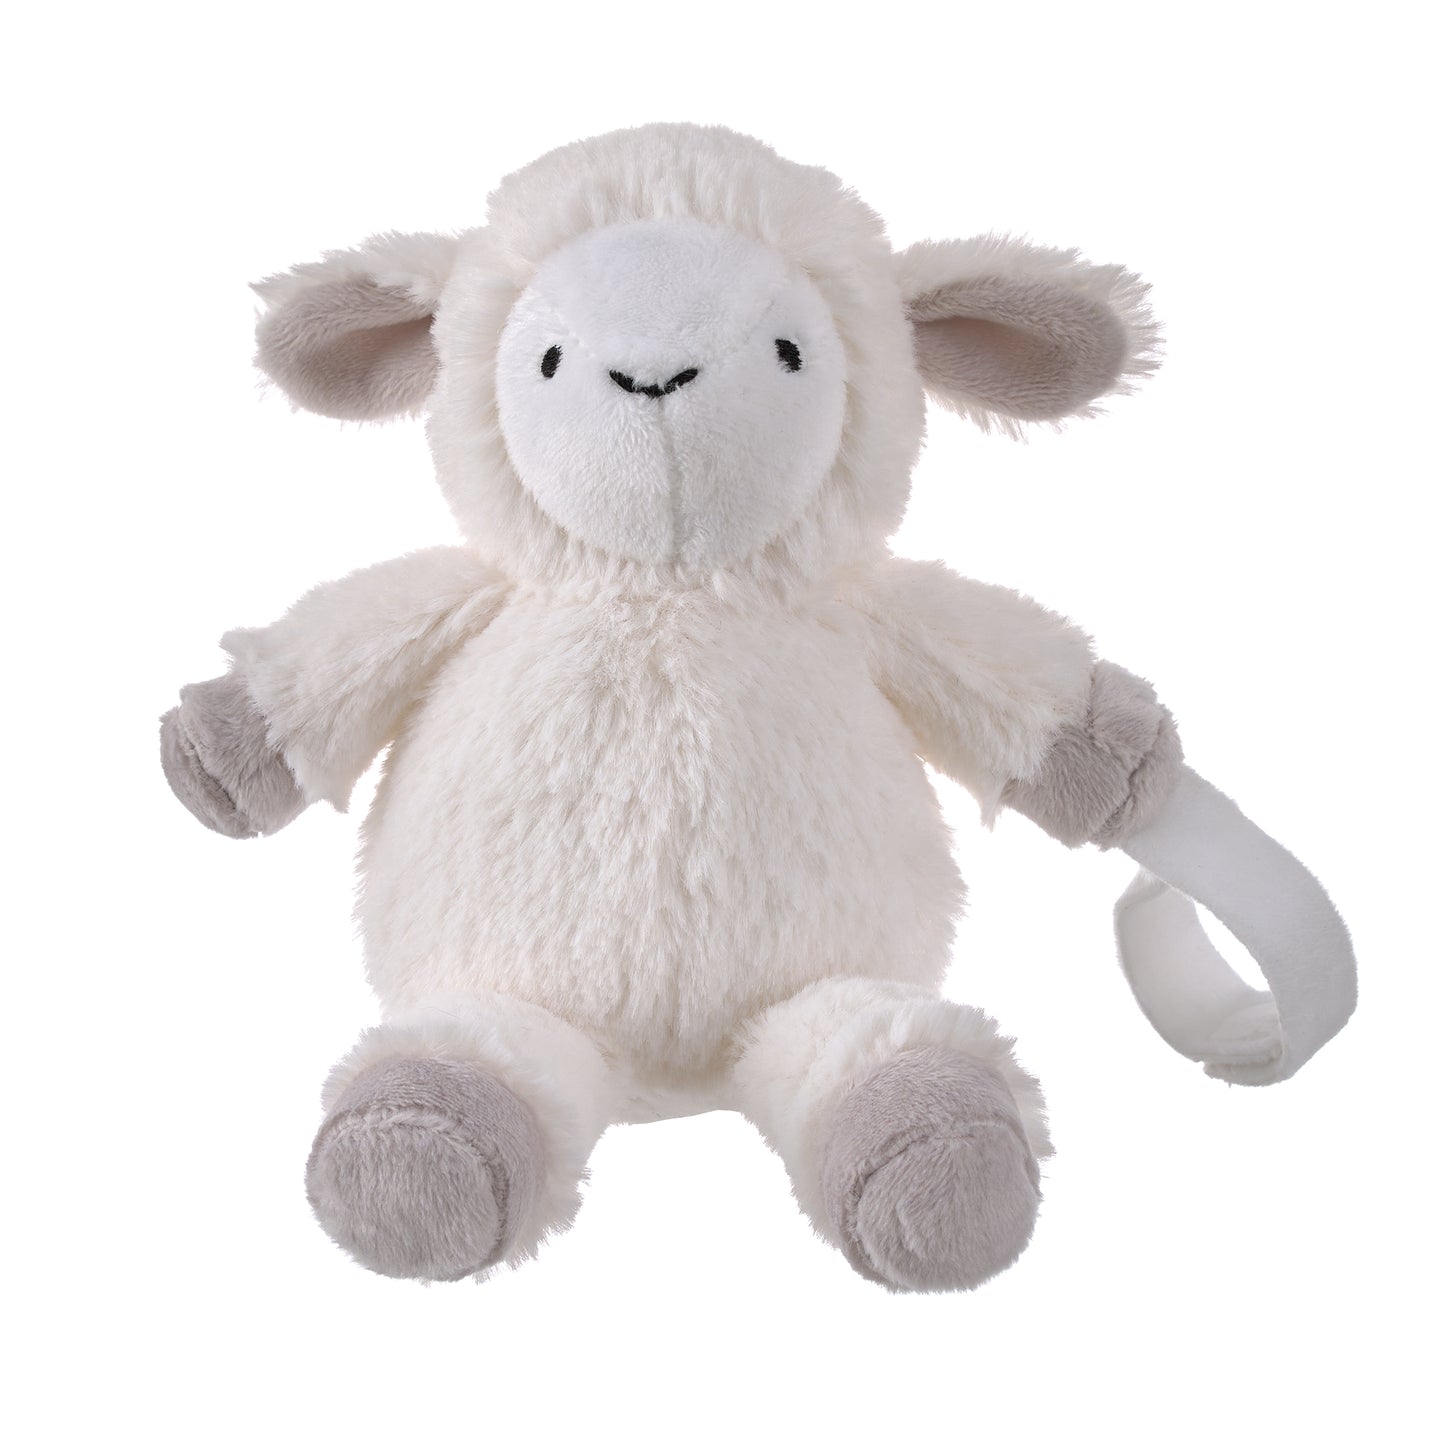 Little Love by NoJo Lamb Shaped White and Taupe Plush Pacifier Buddy